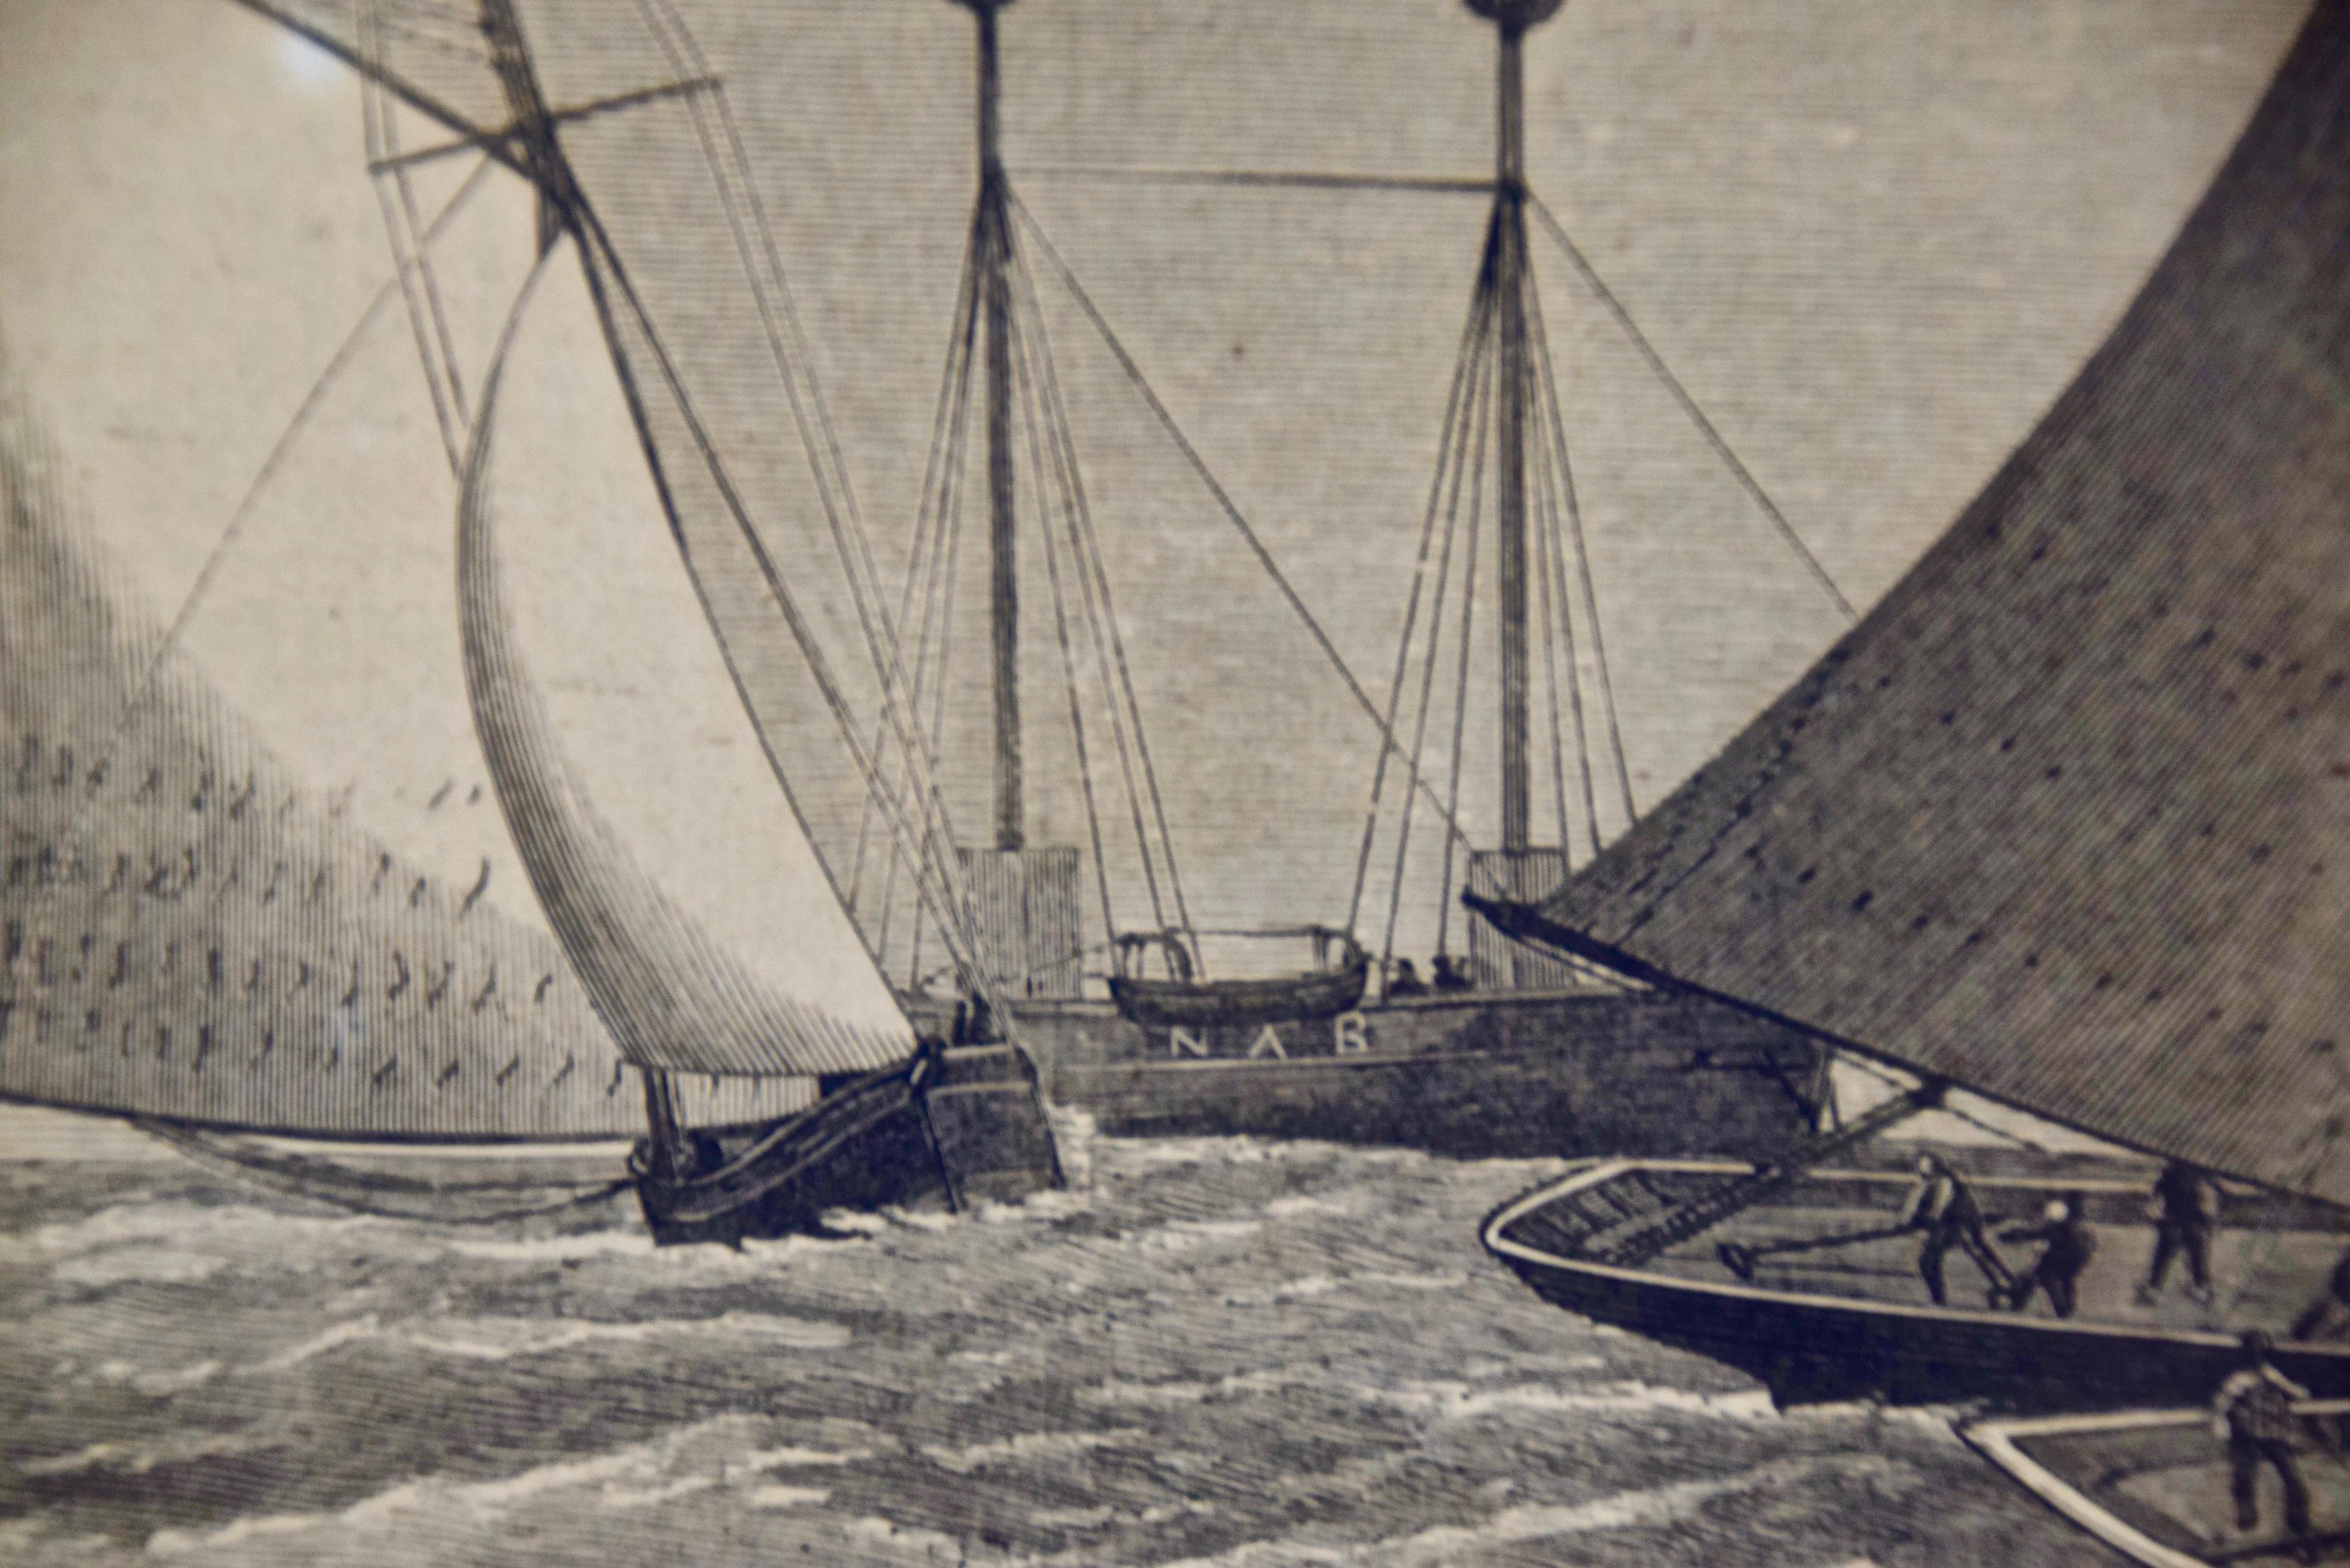 1885 America's Cup Sailing Yachts: Set of 3 Original 19th C. Engravings - Gray Print by Unknown